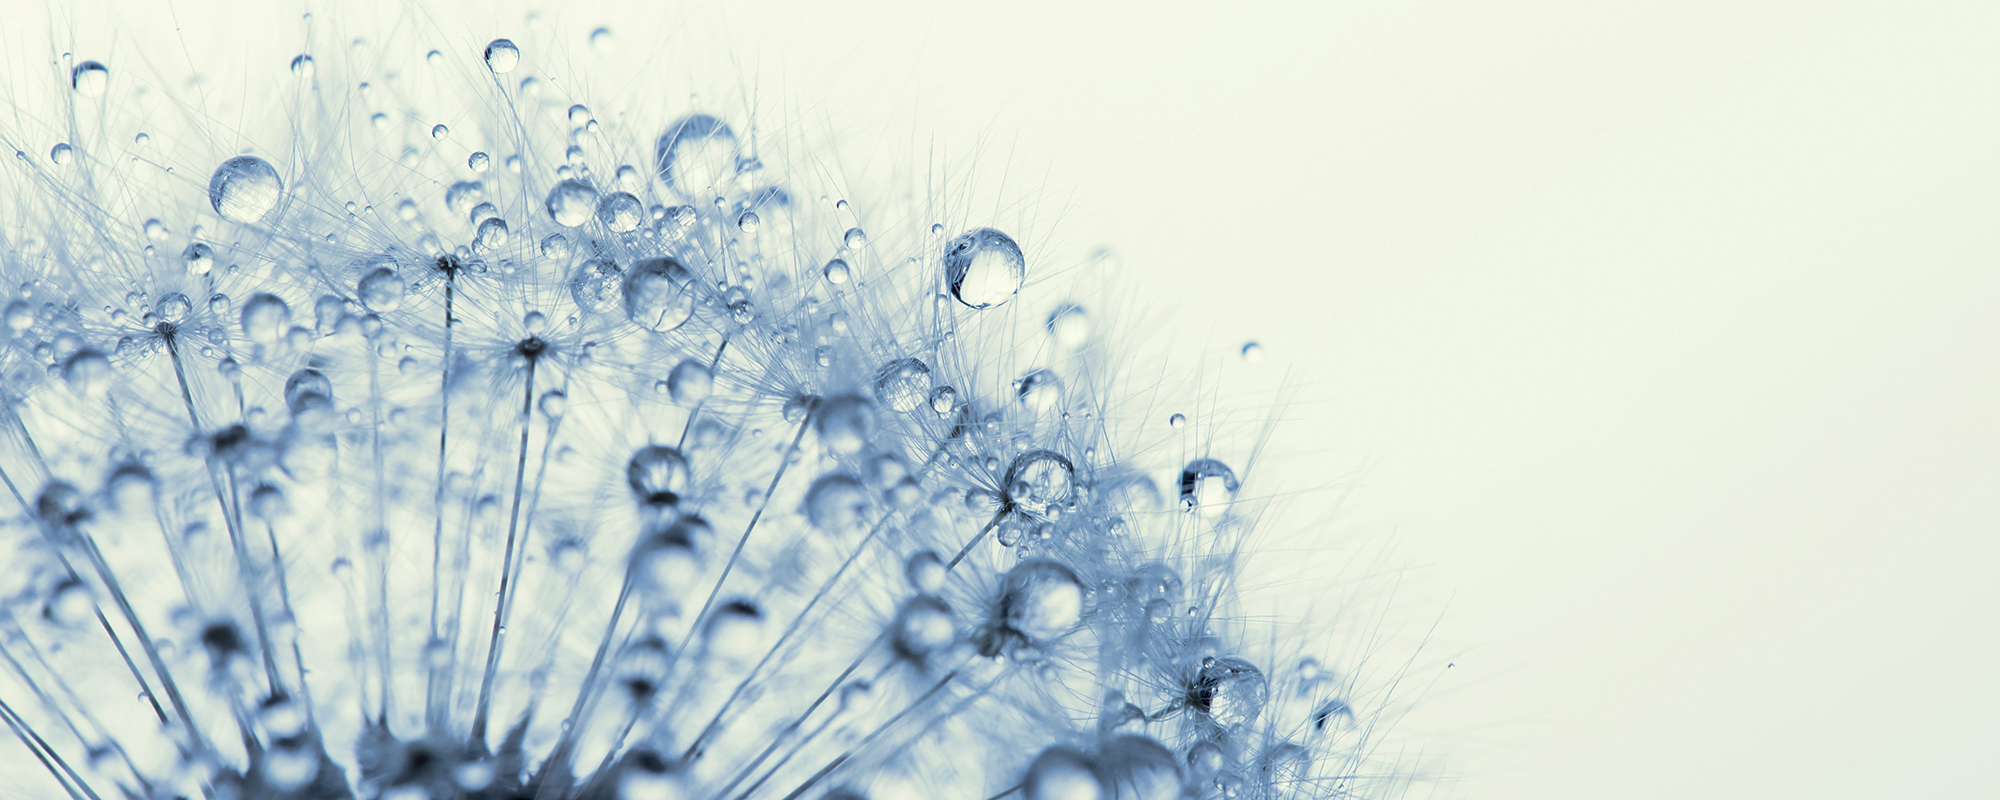 An image of dandelion seeds covered in dew.